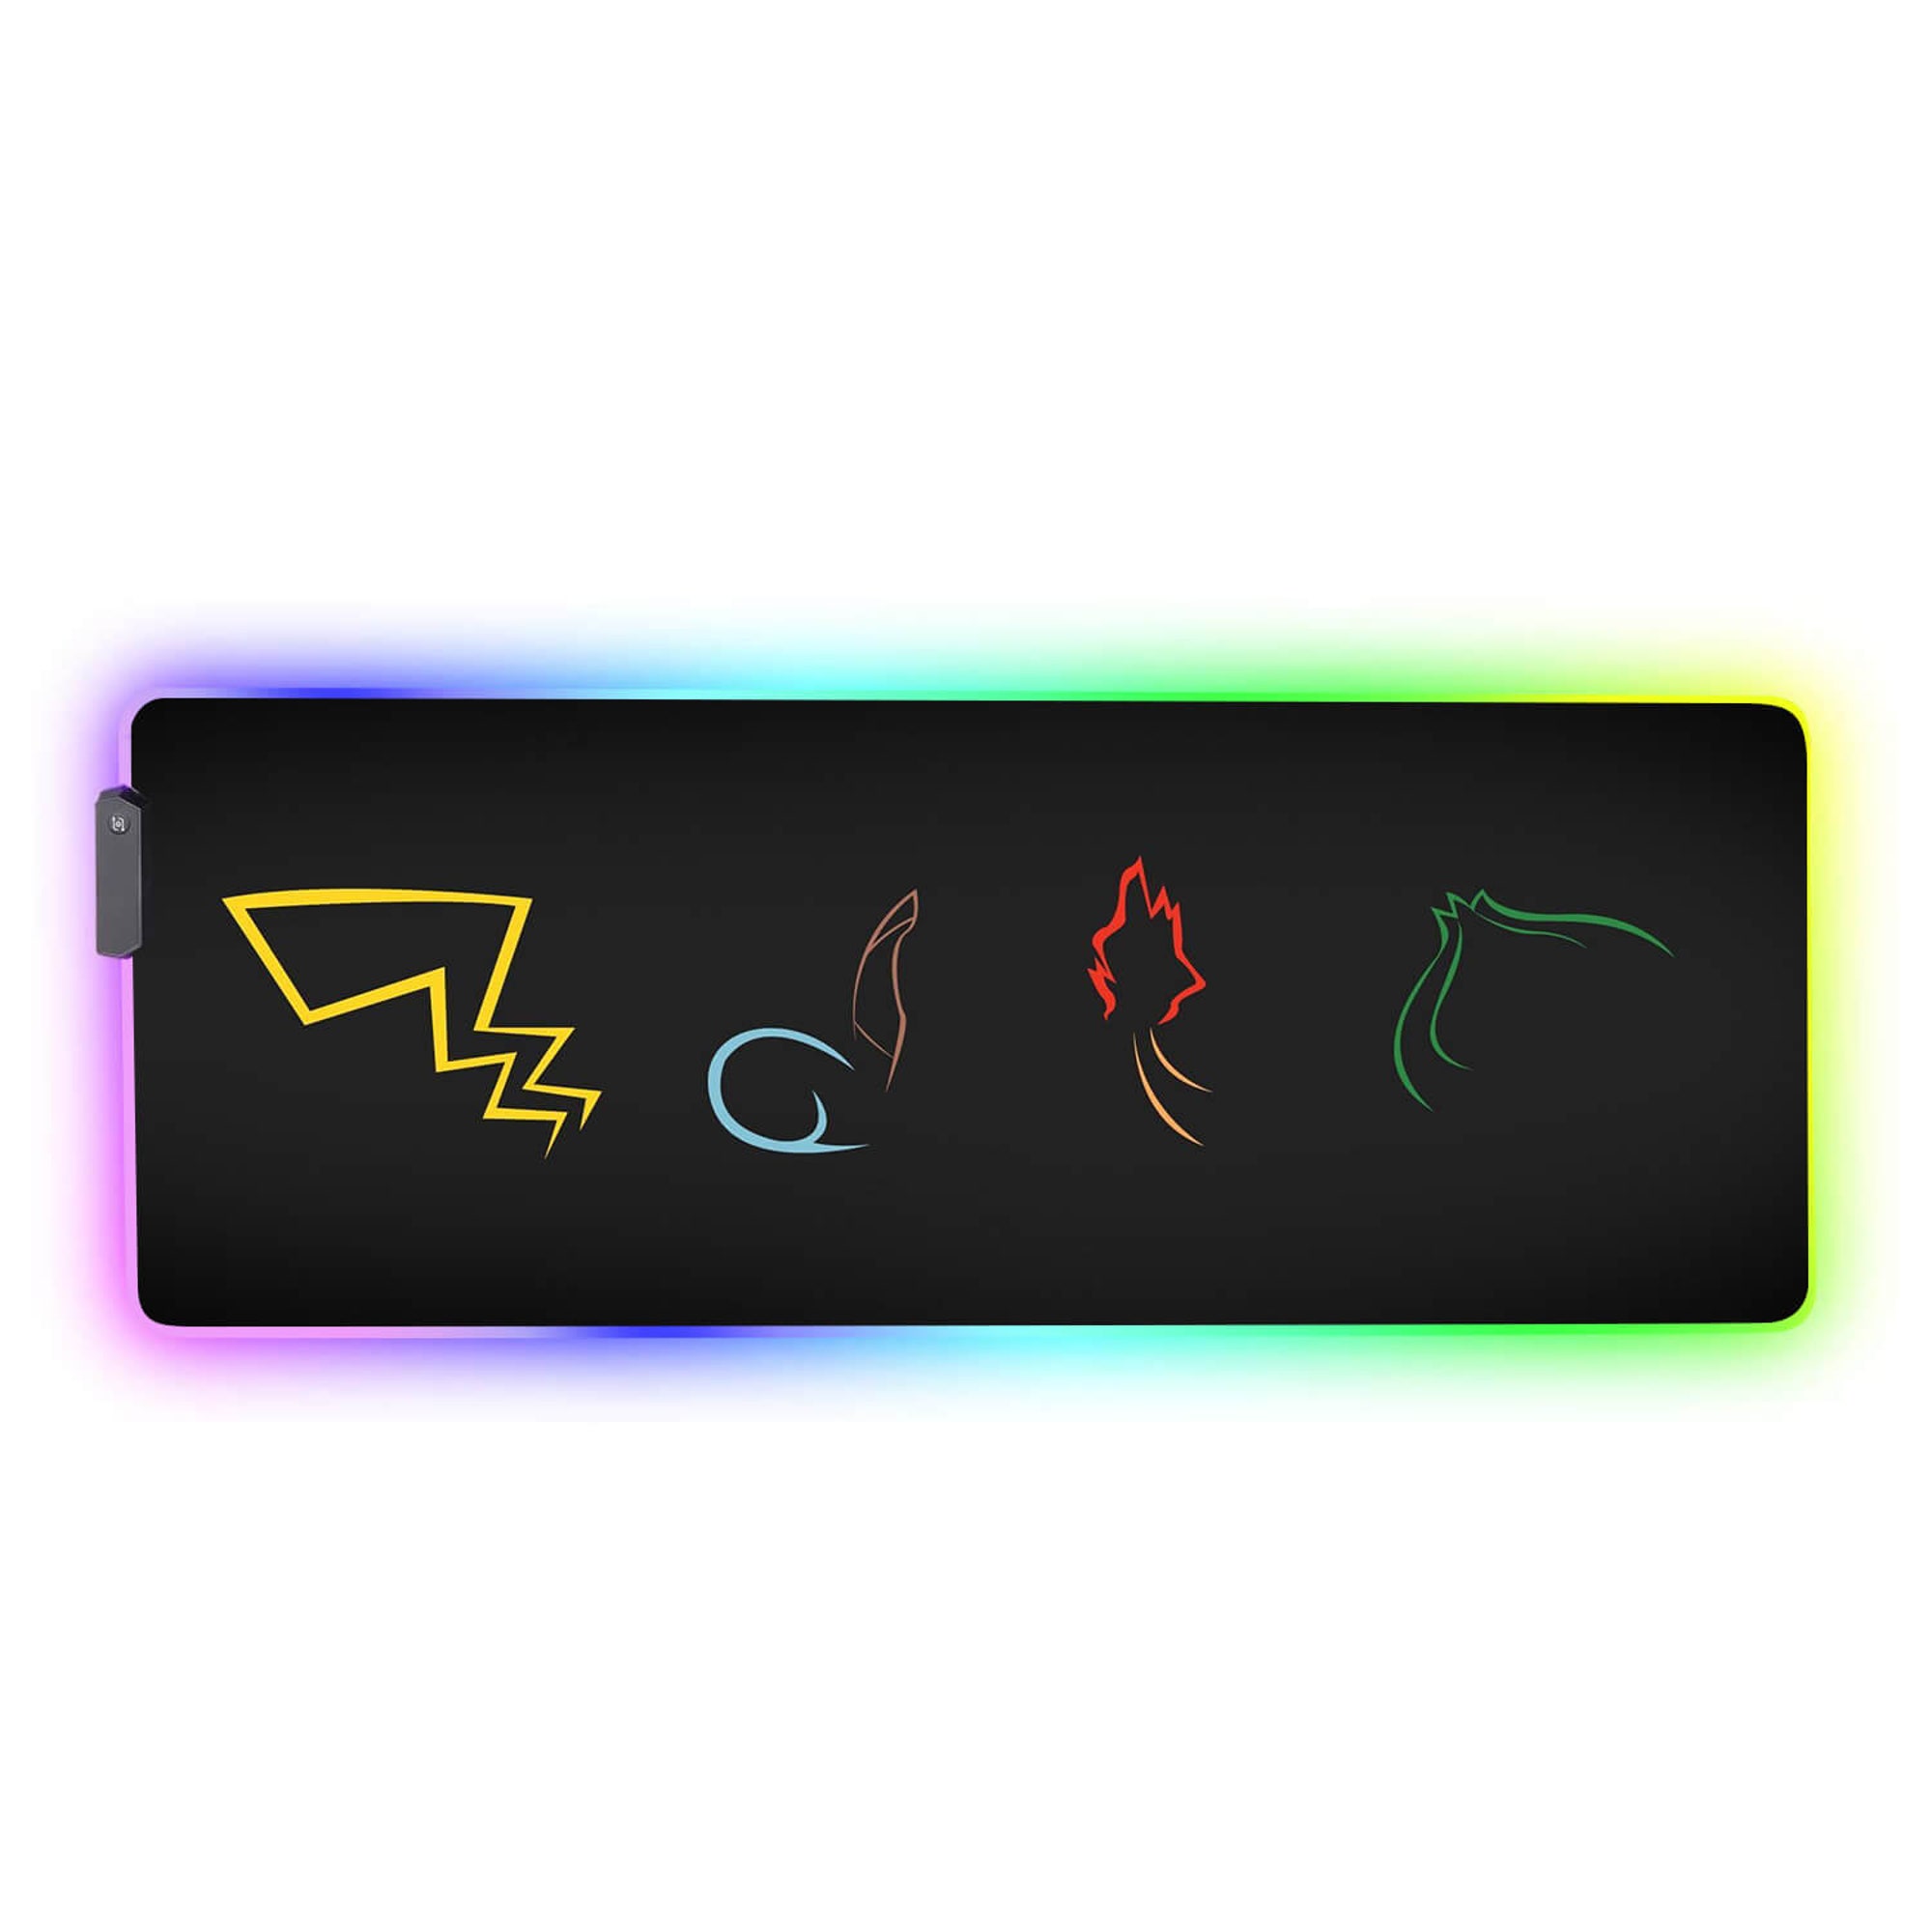 Gost PKM RGB Gaming Mouse Pad, Anime Gaming Led Desk Pad, Cute RGB Gaming Desk Mat